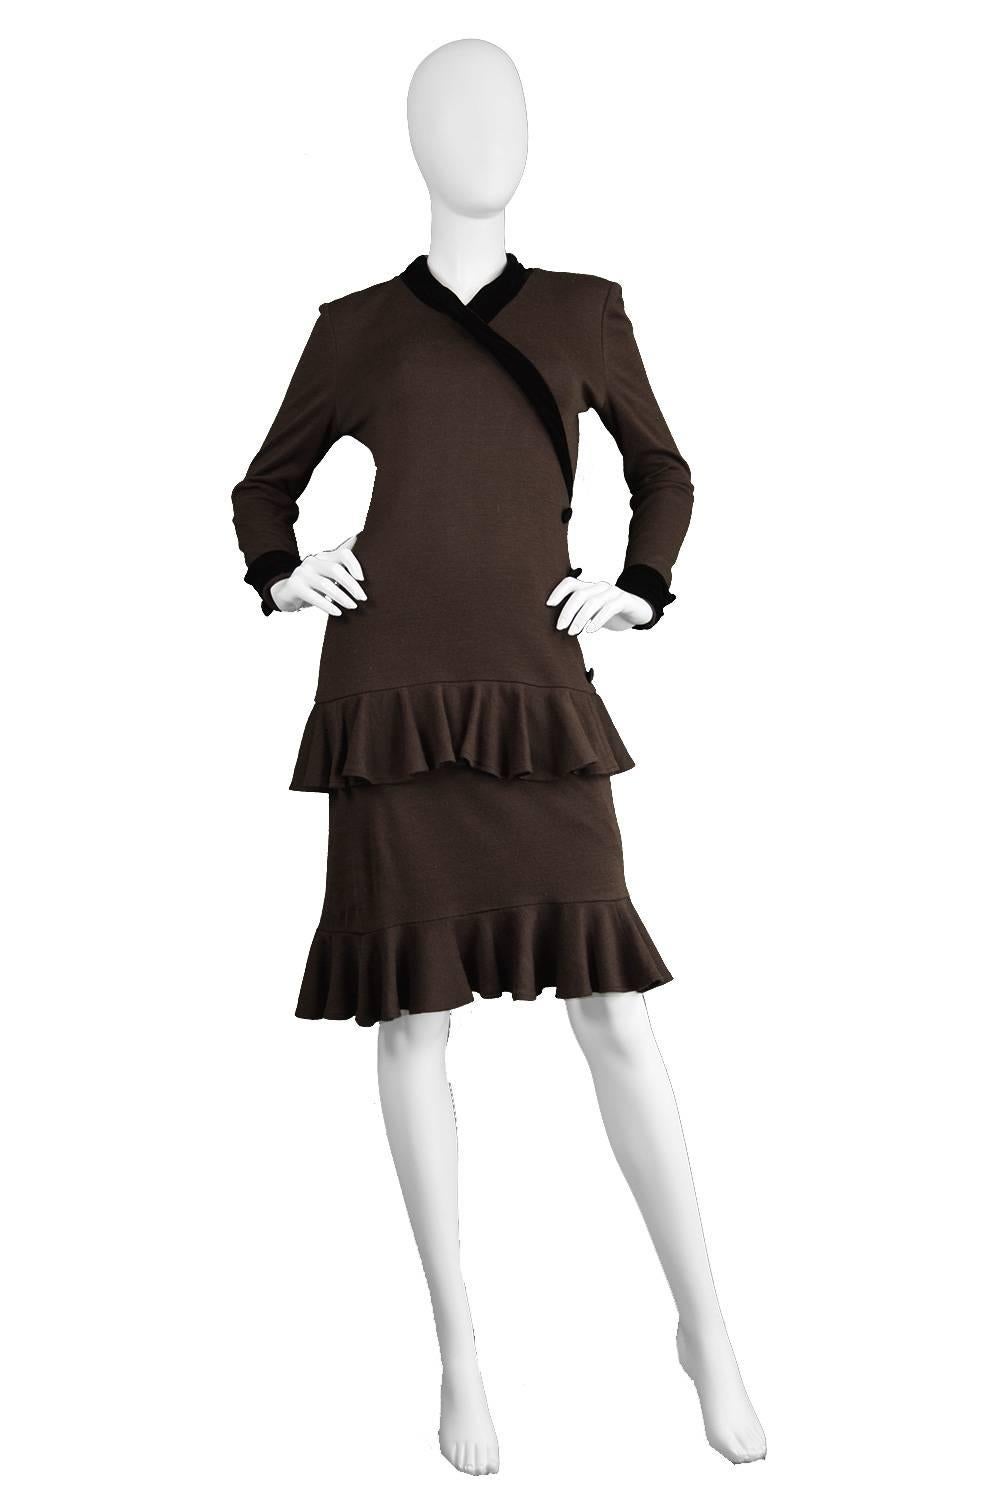 A playful yet sophisticated vintage dress from the late 70s/ early 80s by iconic designer, Oscar de la Renta for his 'Miss O' line. In a brown knit fabric with a black velvet trim highlighting the neckline and cuffs. The silhouette is fitted at the